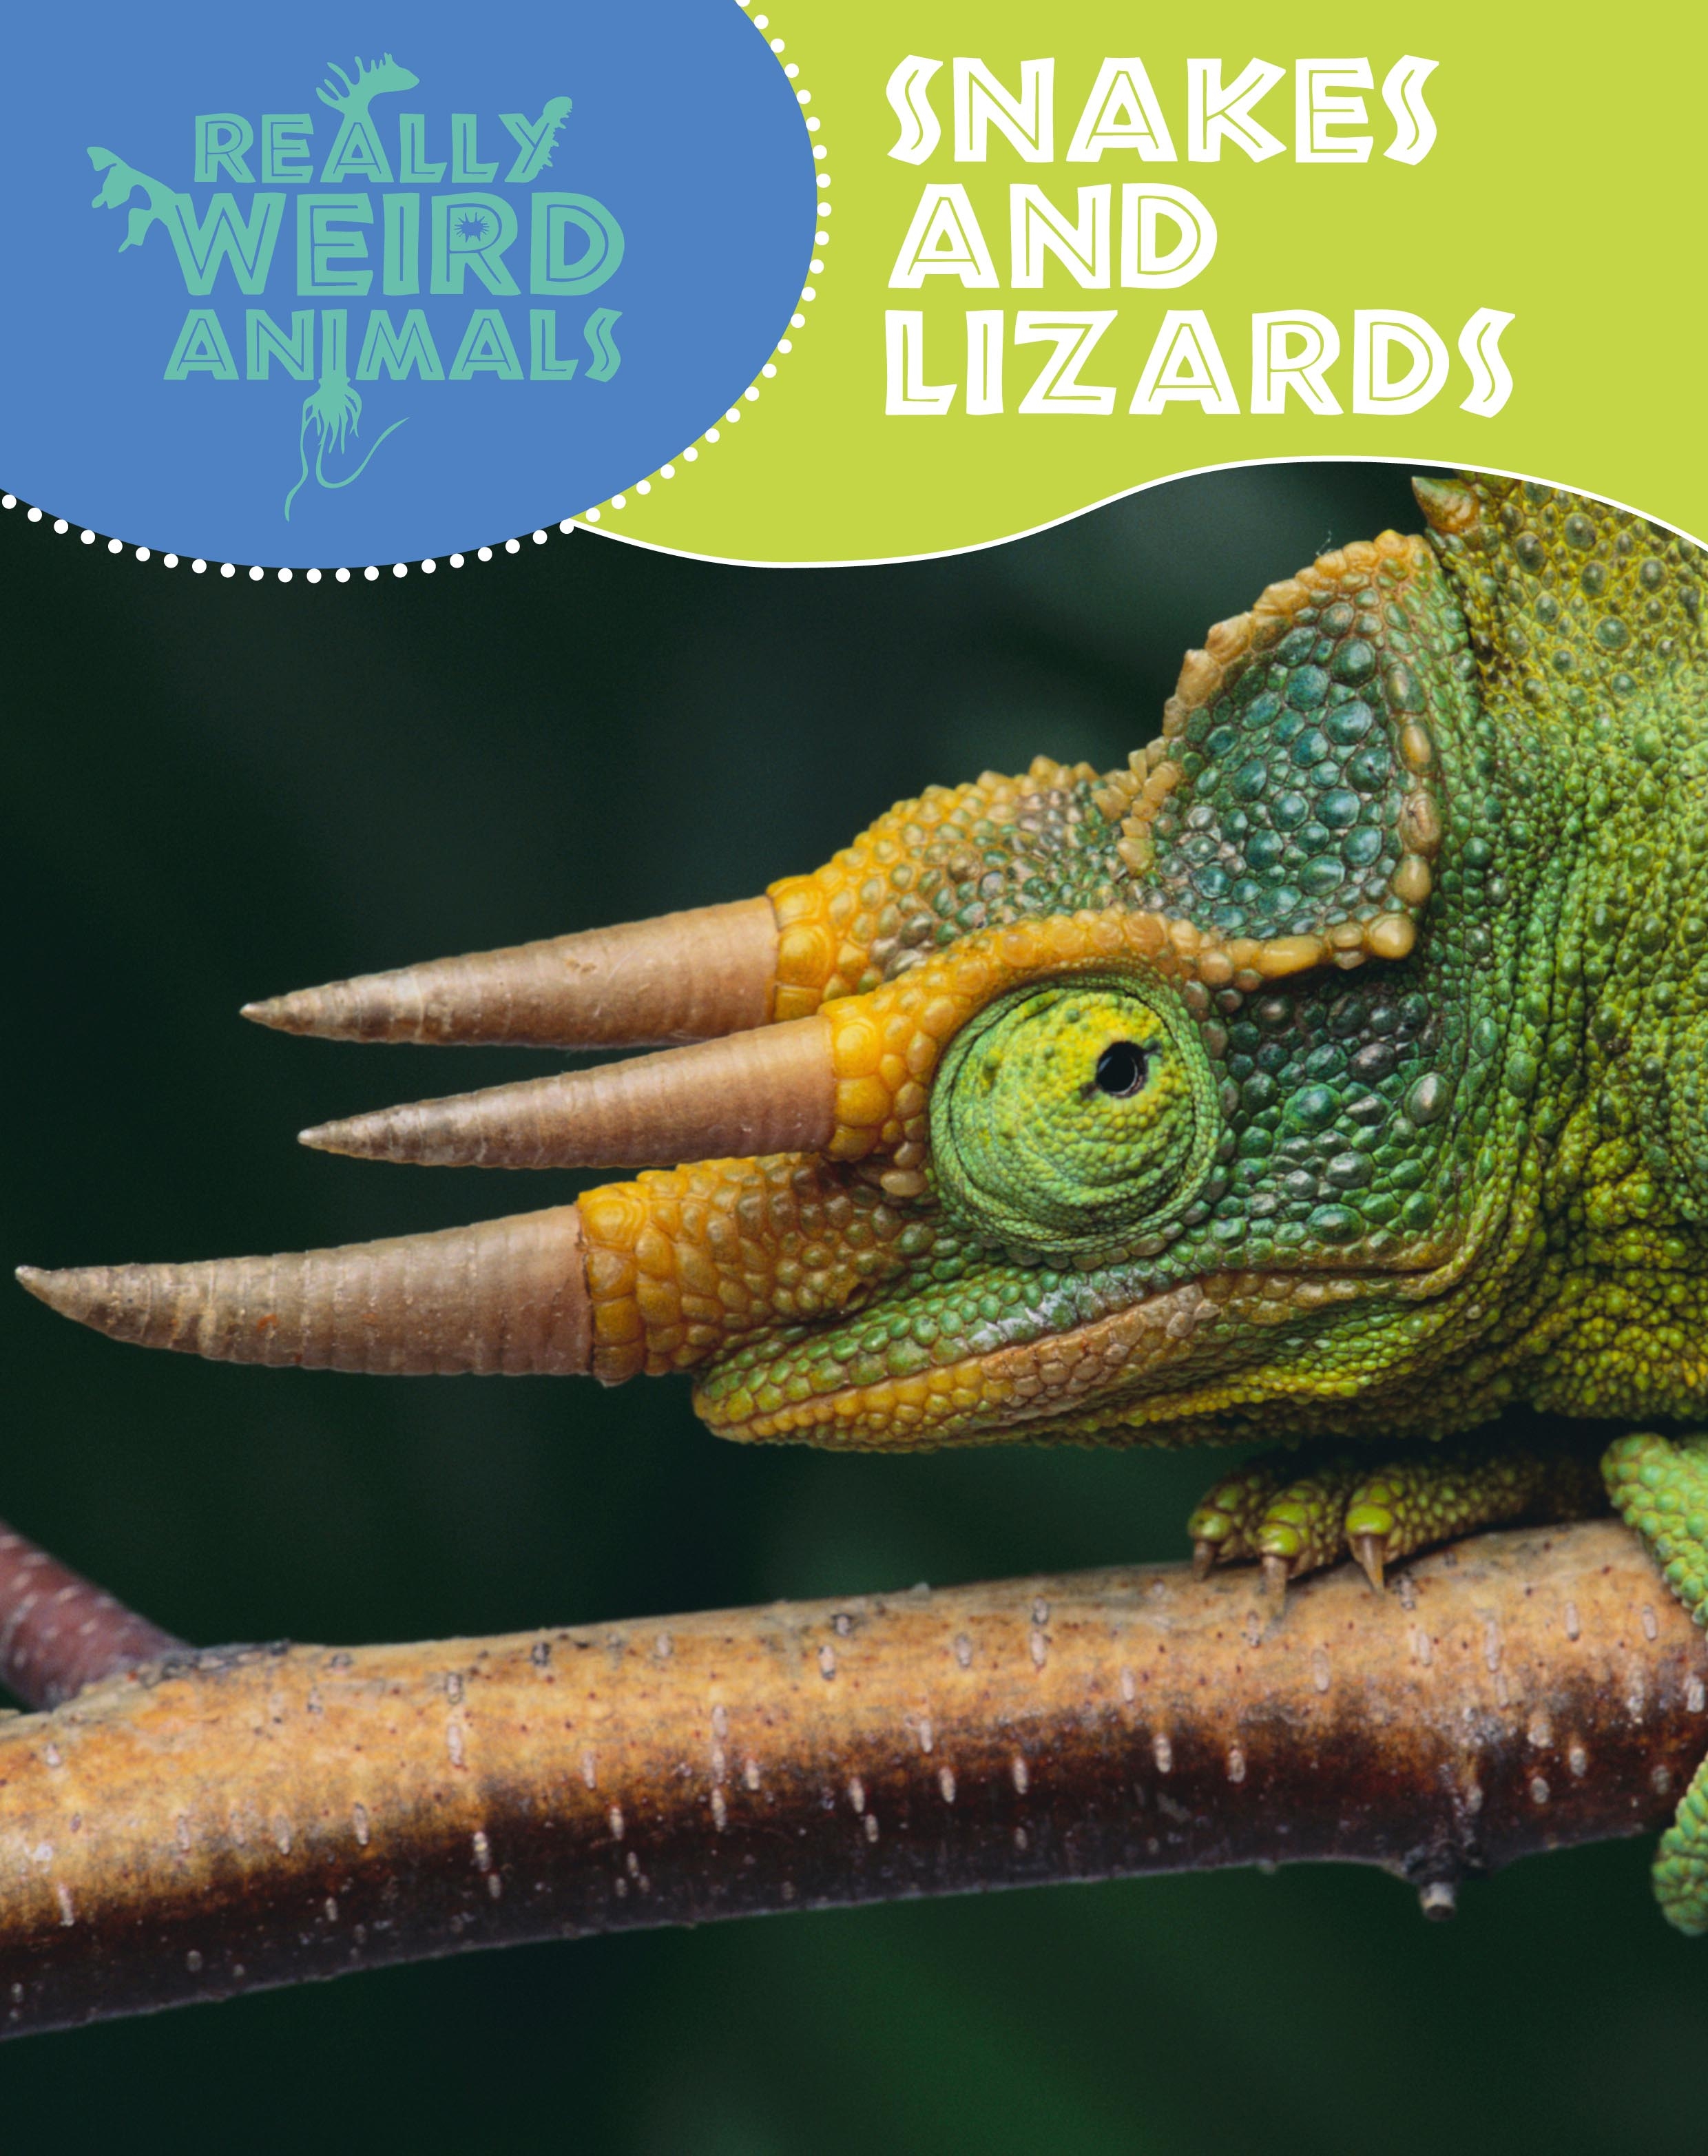 Really Weird Animals: Snakes and Lizards by Clare Hibbert | Hachette UK